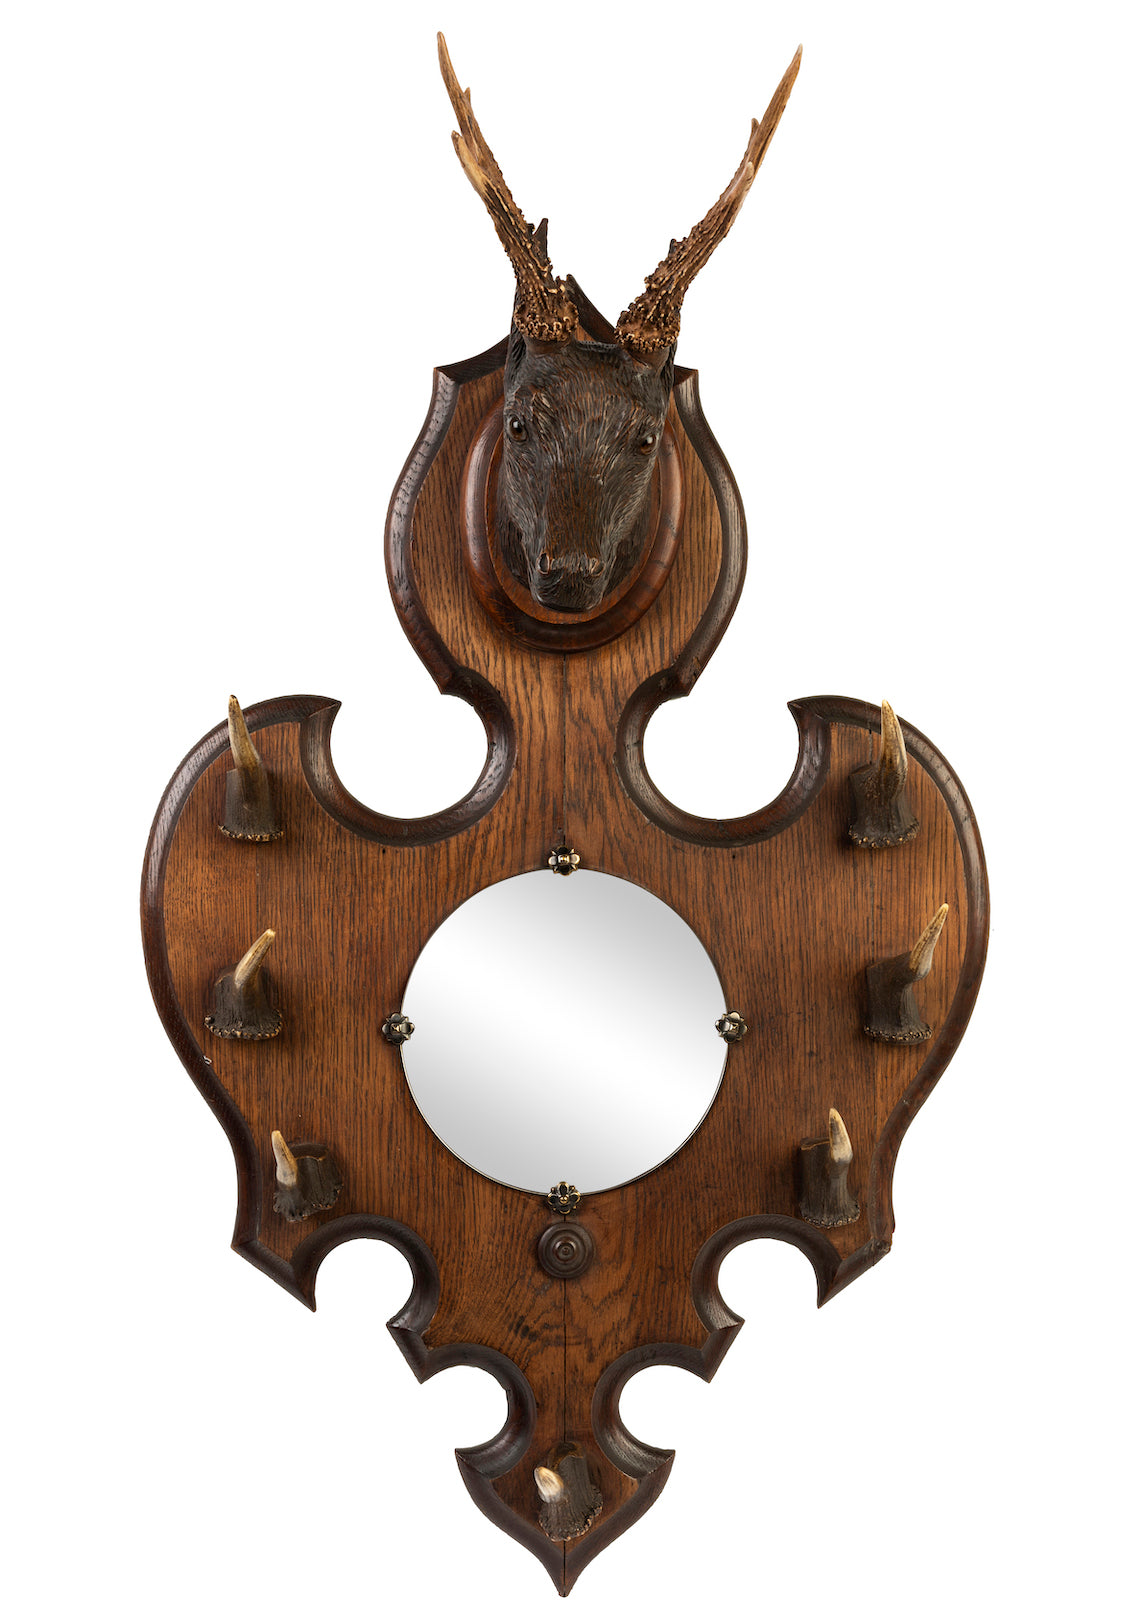 SOLD A good quality Black-Forest carved wall coat-rack, Swiss Circa 1900